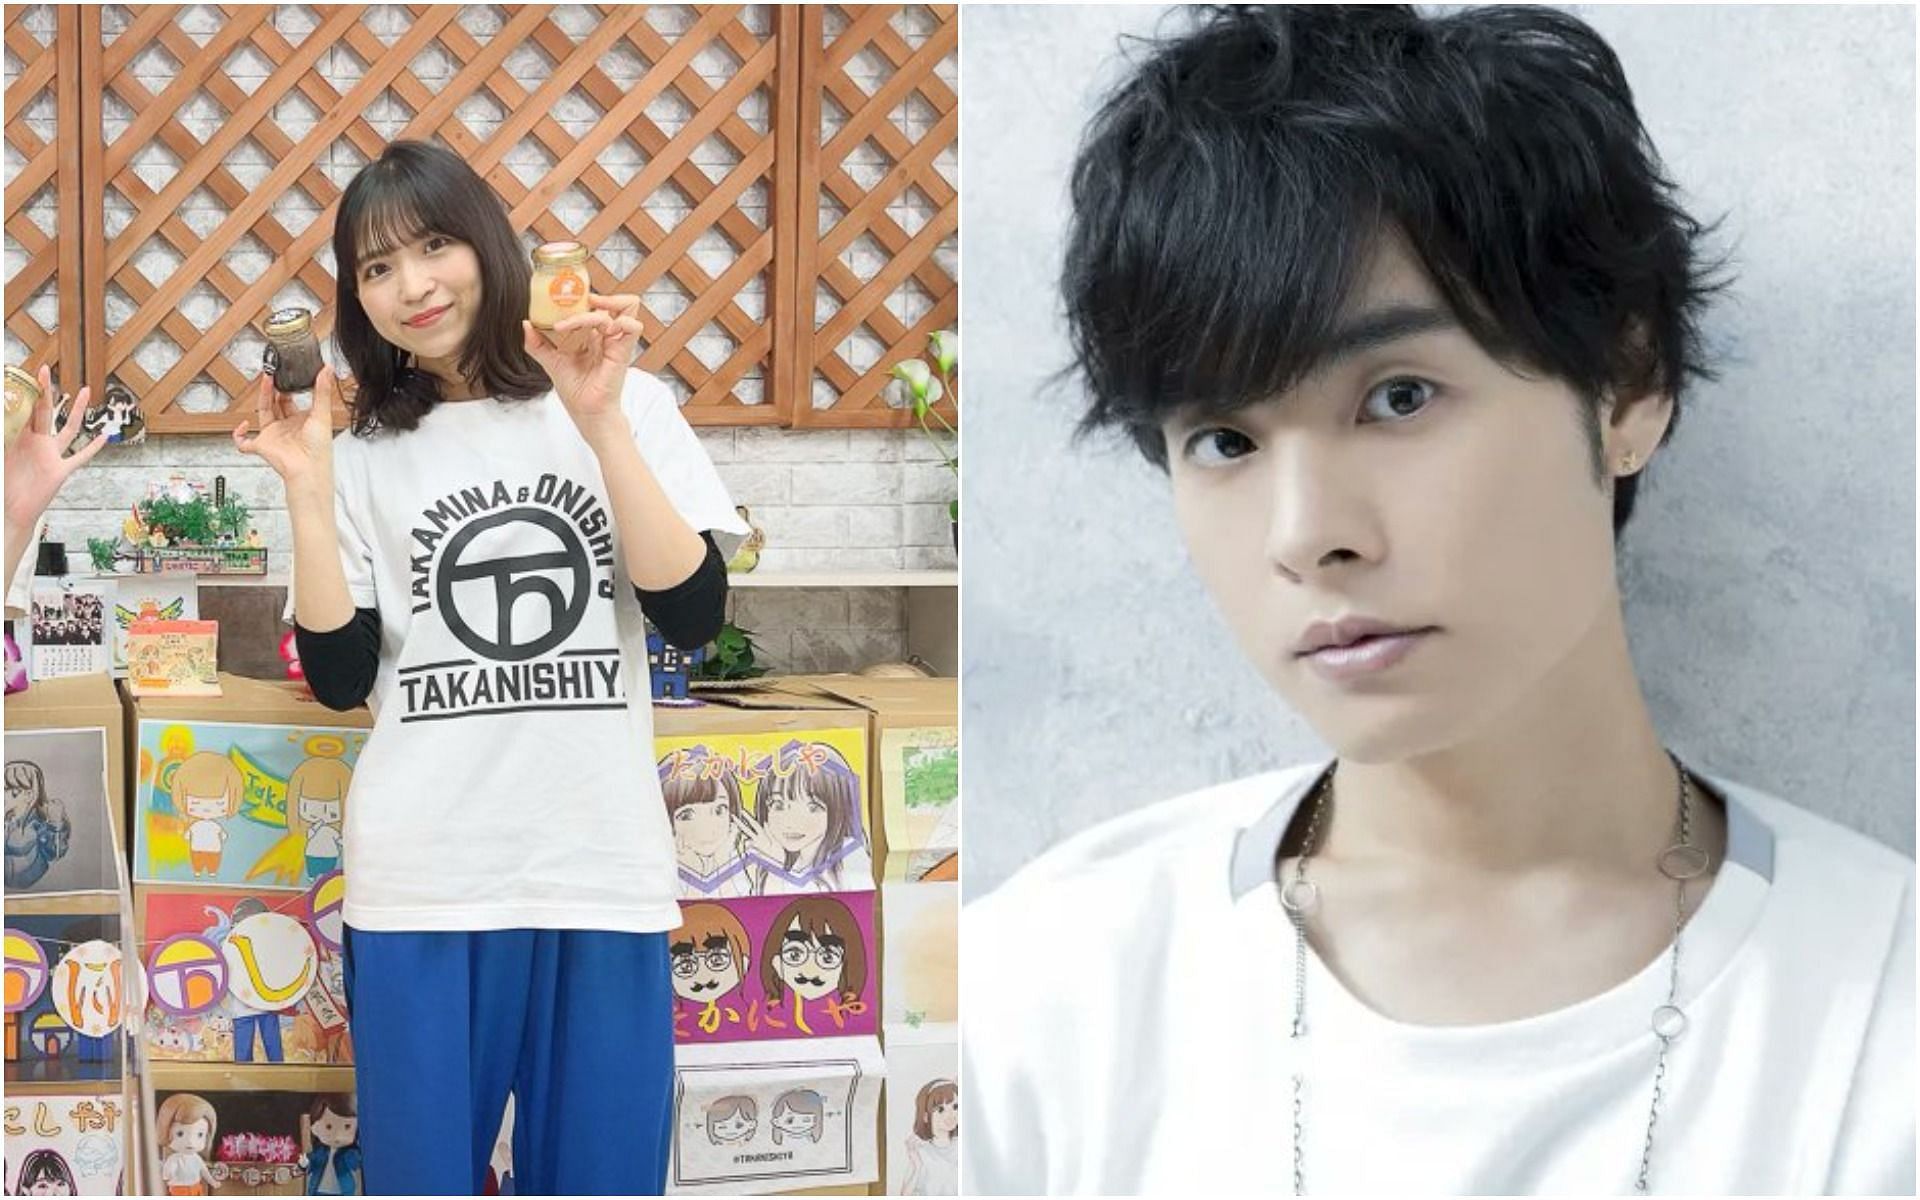 Voice actors Nobuhiko Okamoto and Saori Onishi test positive for COVID-19 (Images via Twitter/@Ernest_Chang_27) and @FunianmeBr